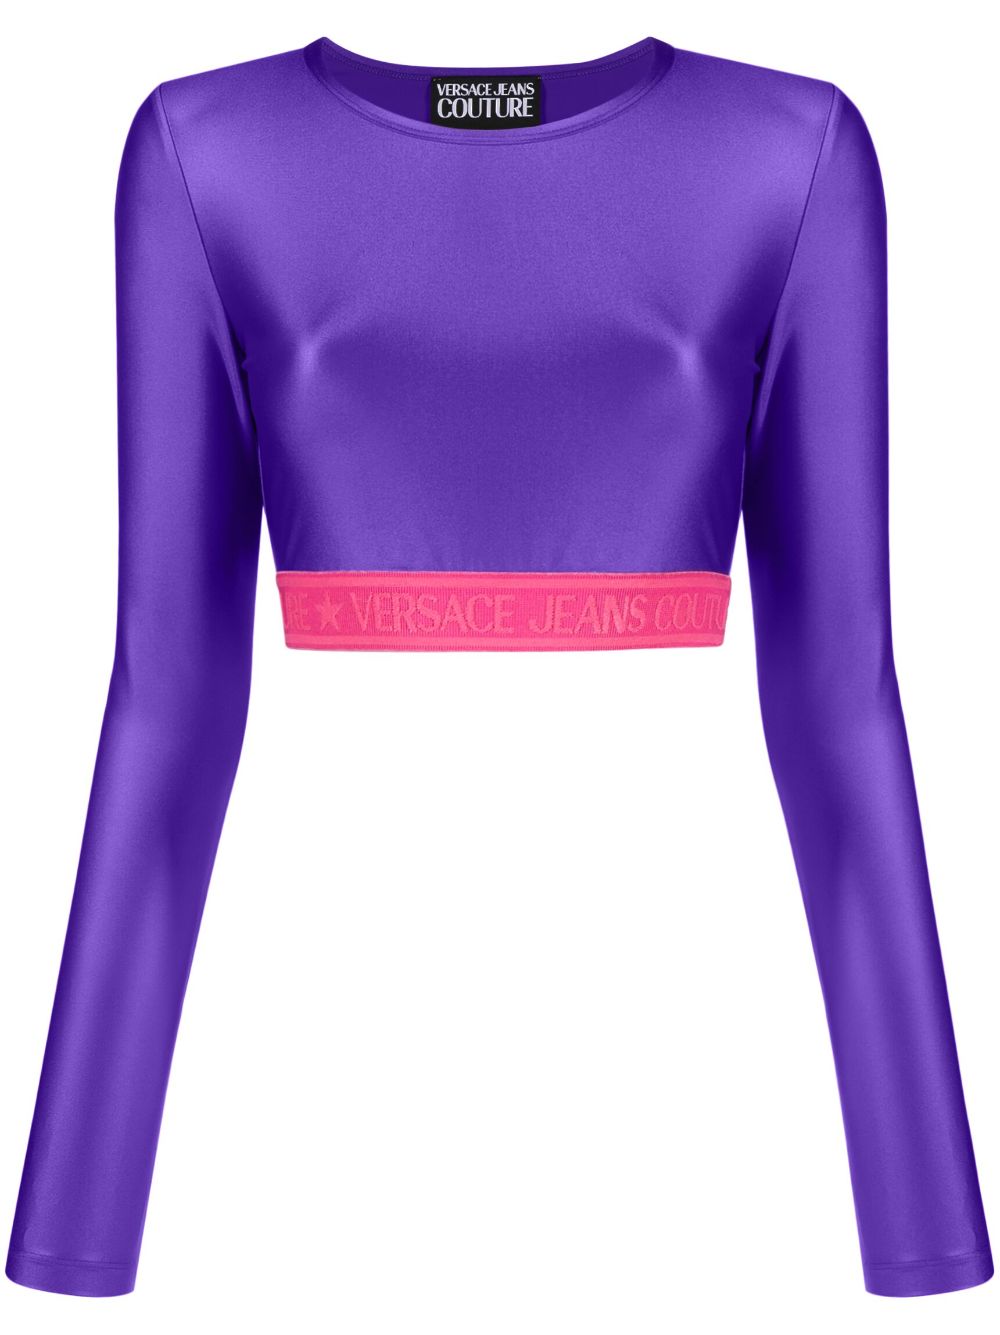 Versace Jeans Couture logo-underband crop top - Purple von Versace Jeans Couture